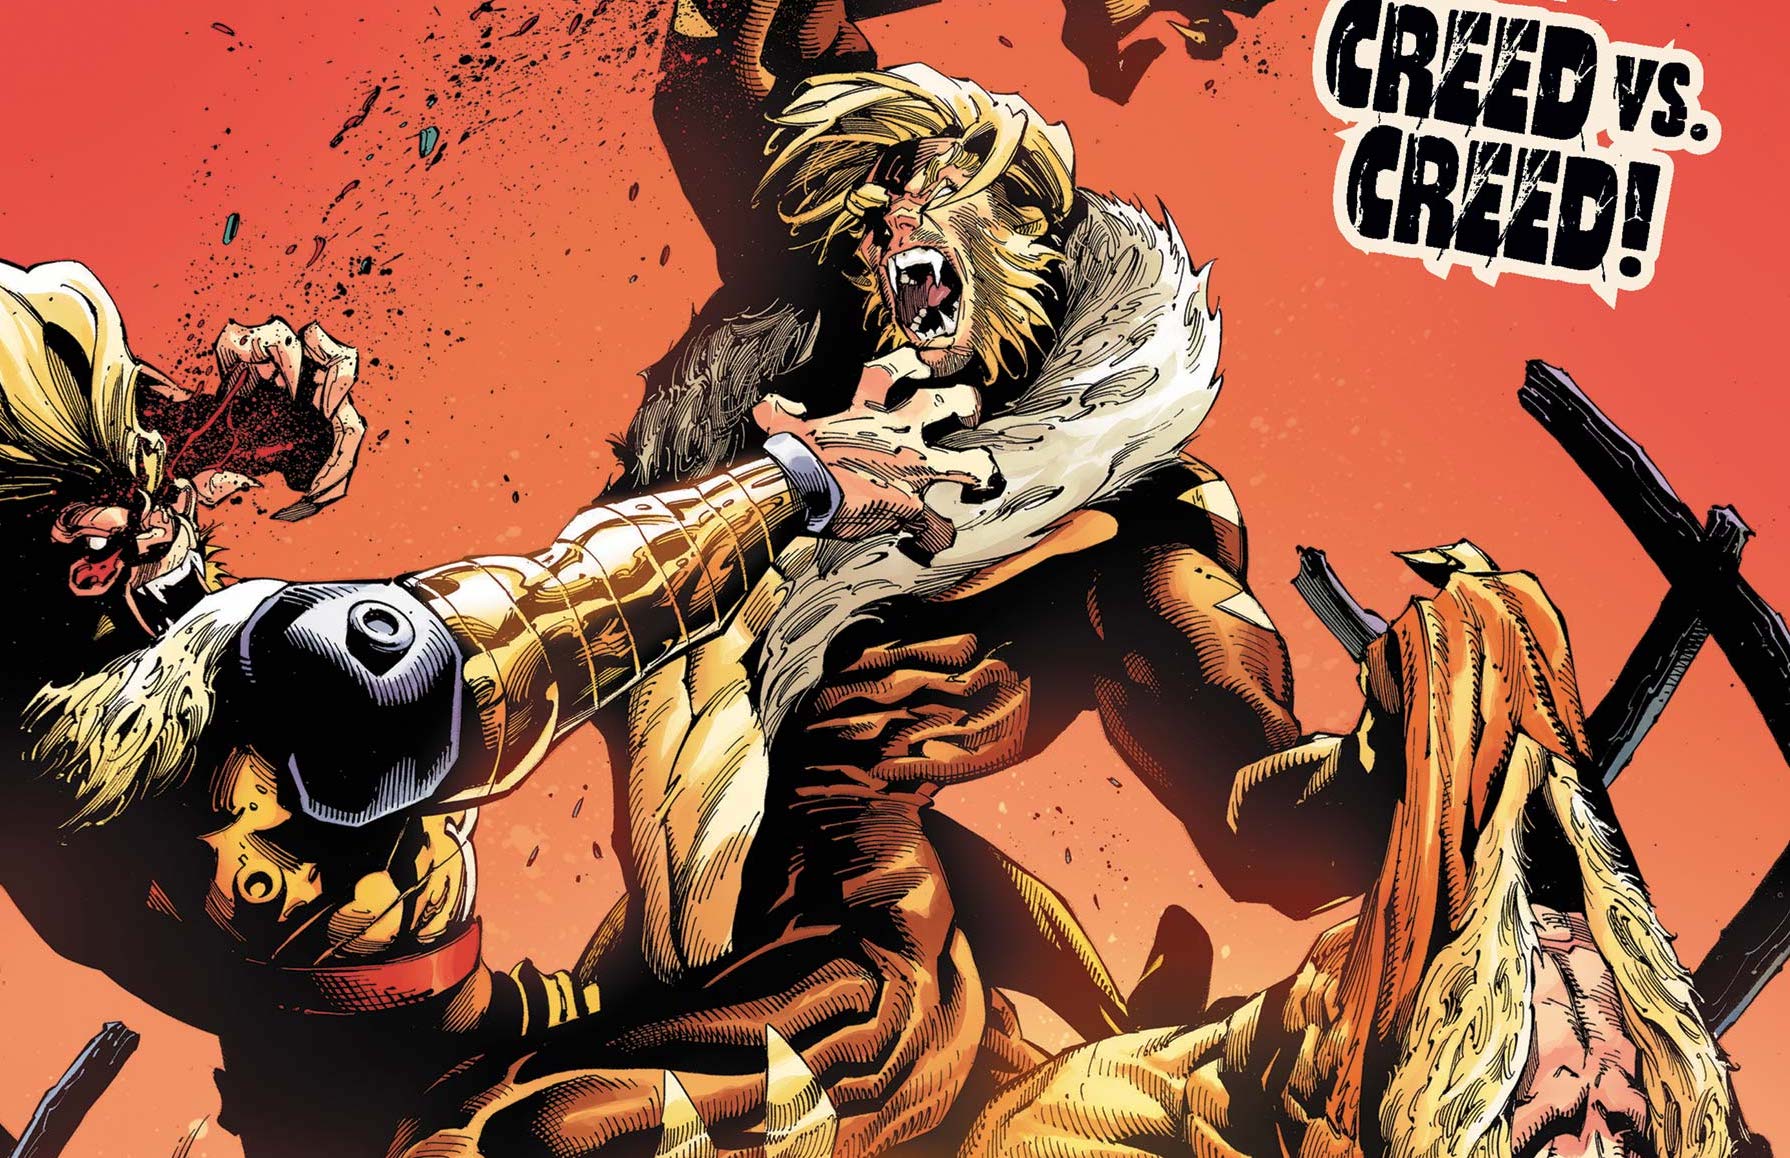 Sabretooth & the Exiles #5